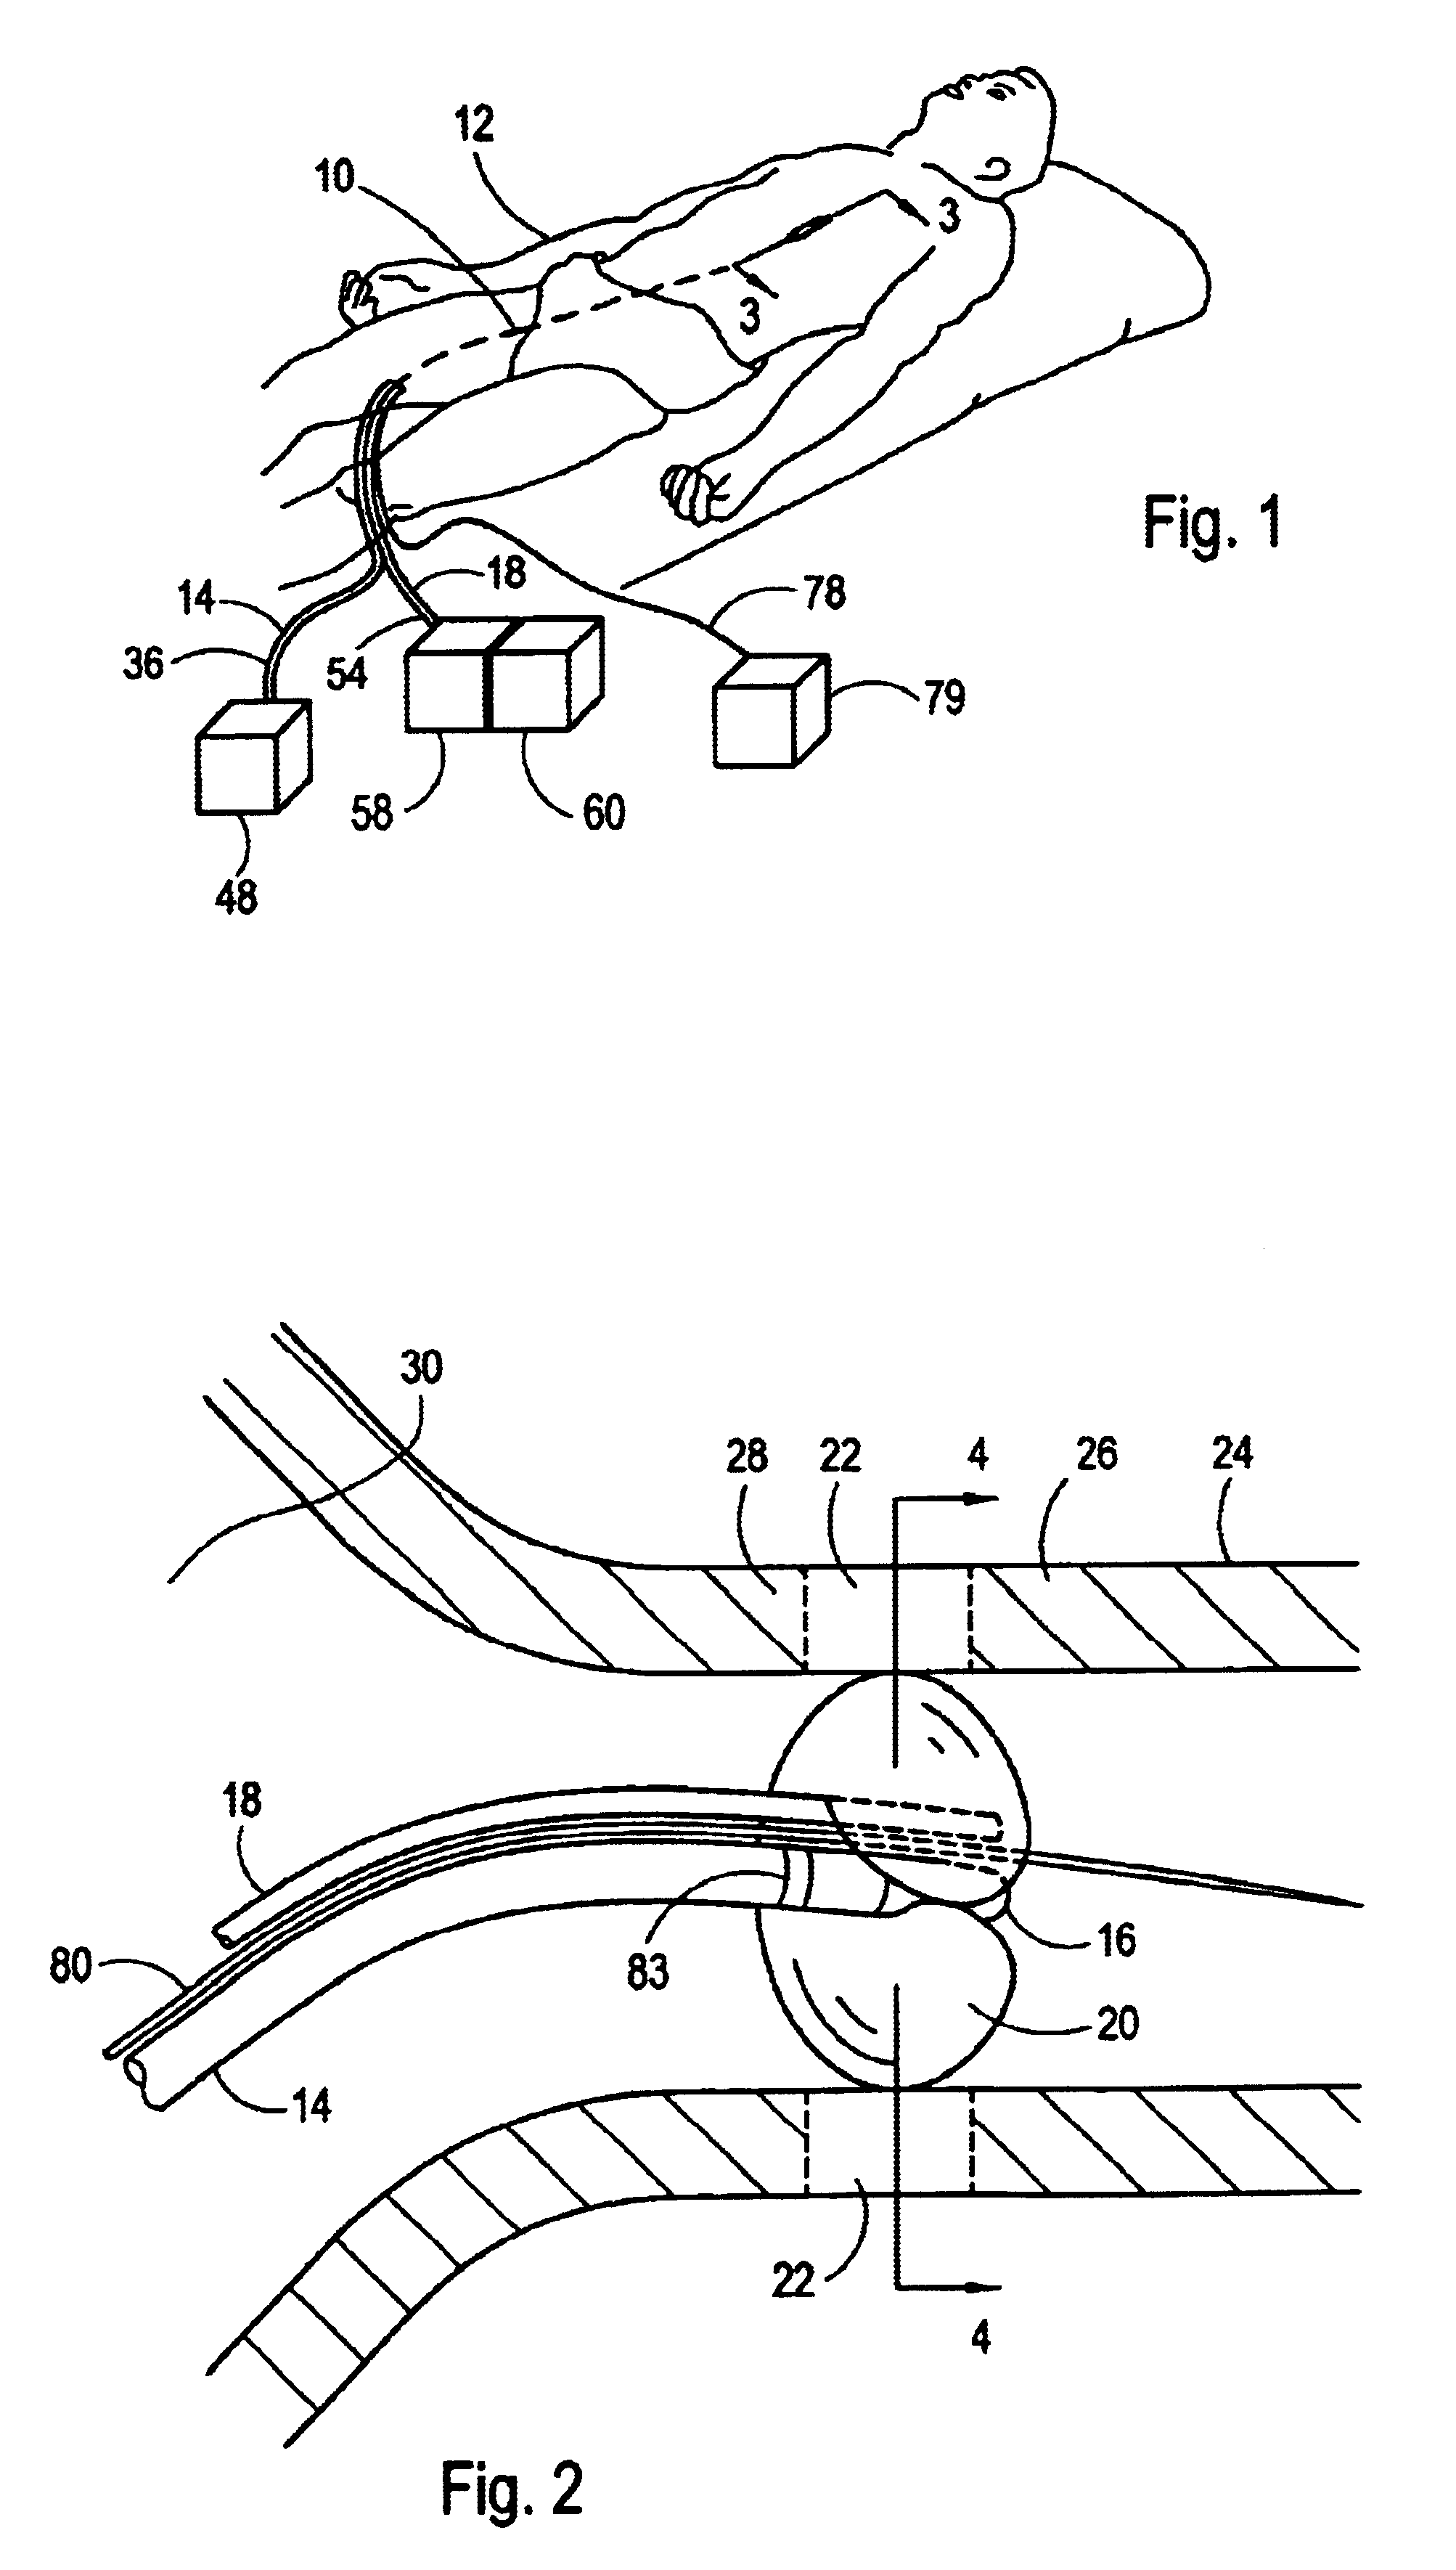 System and method for performing a single step cryoablation